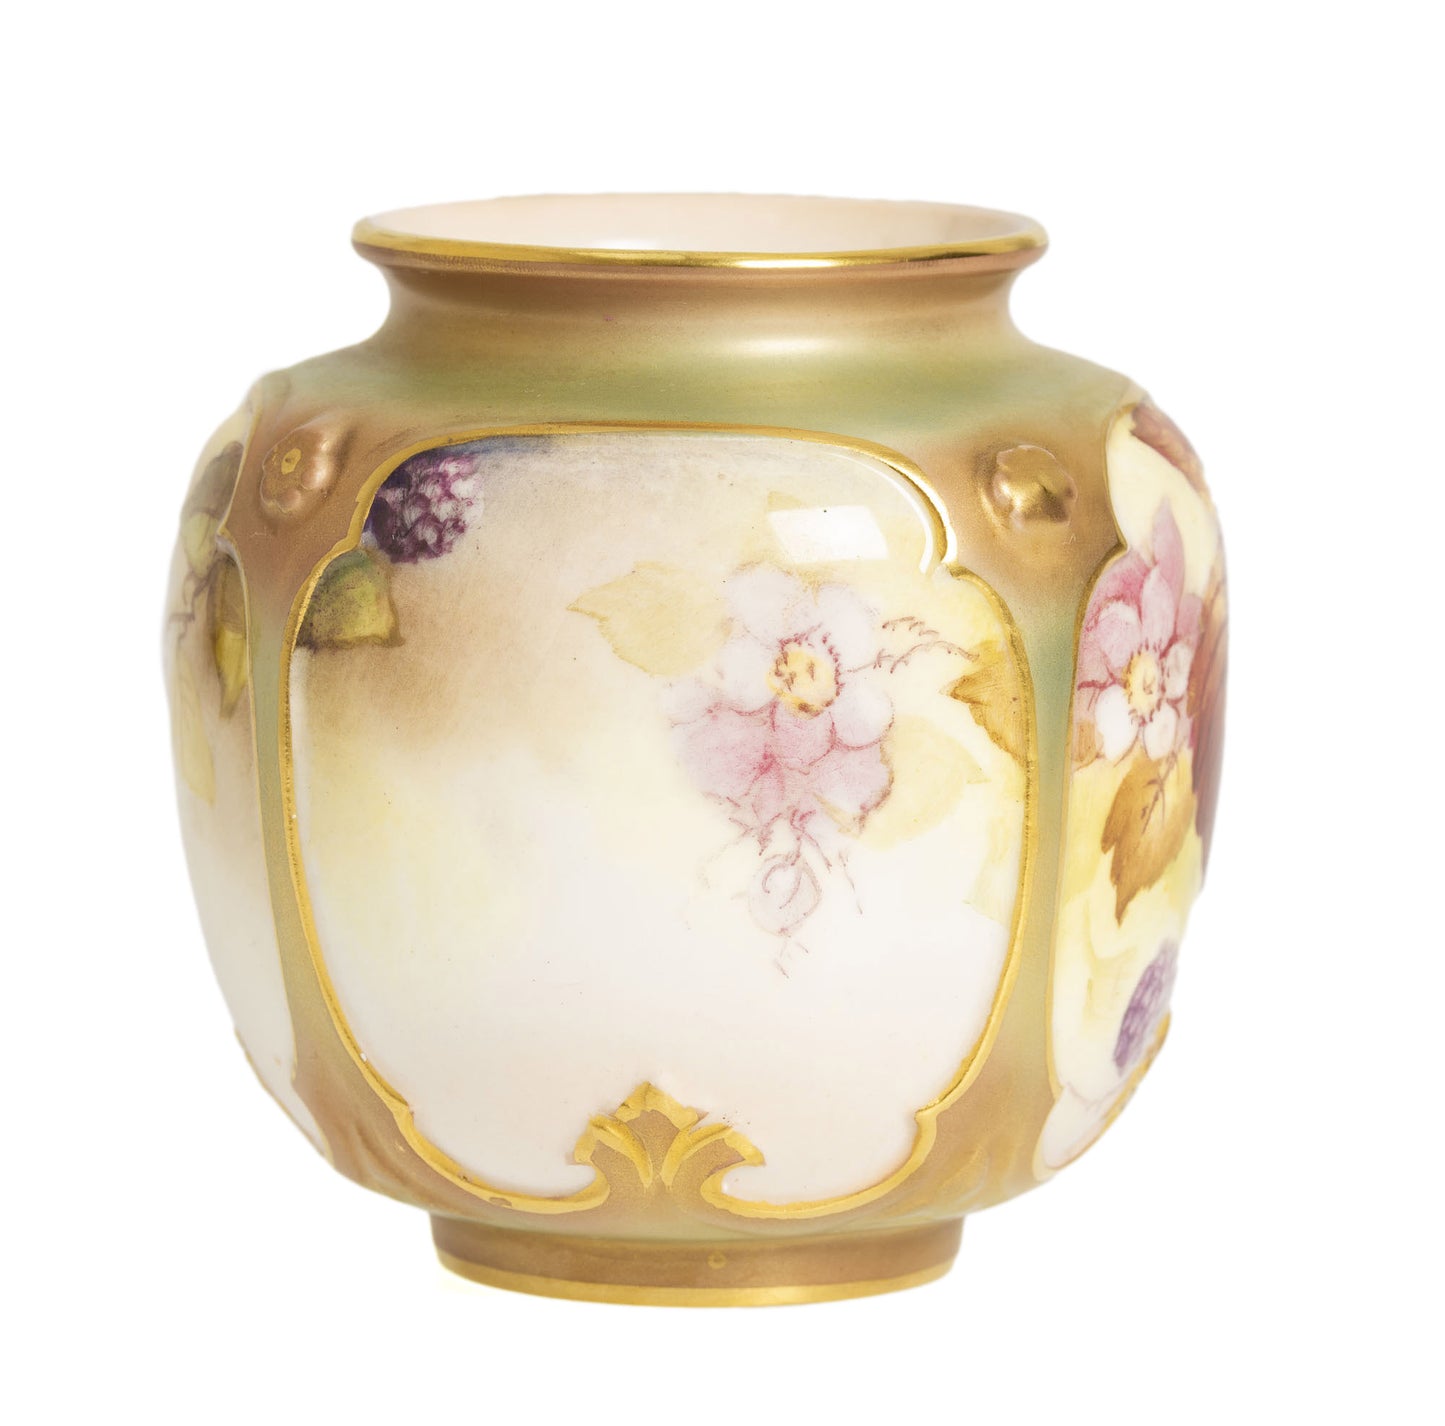 Royal Worcester Vase Hand Painted with Blackberries and Leaves by Kitty Blake (2956)